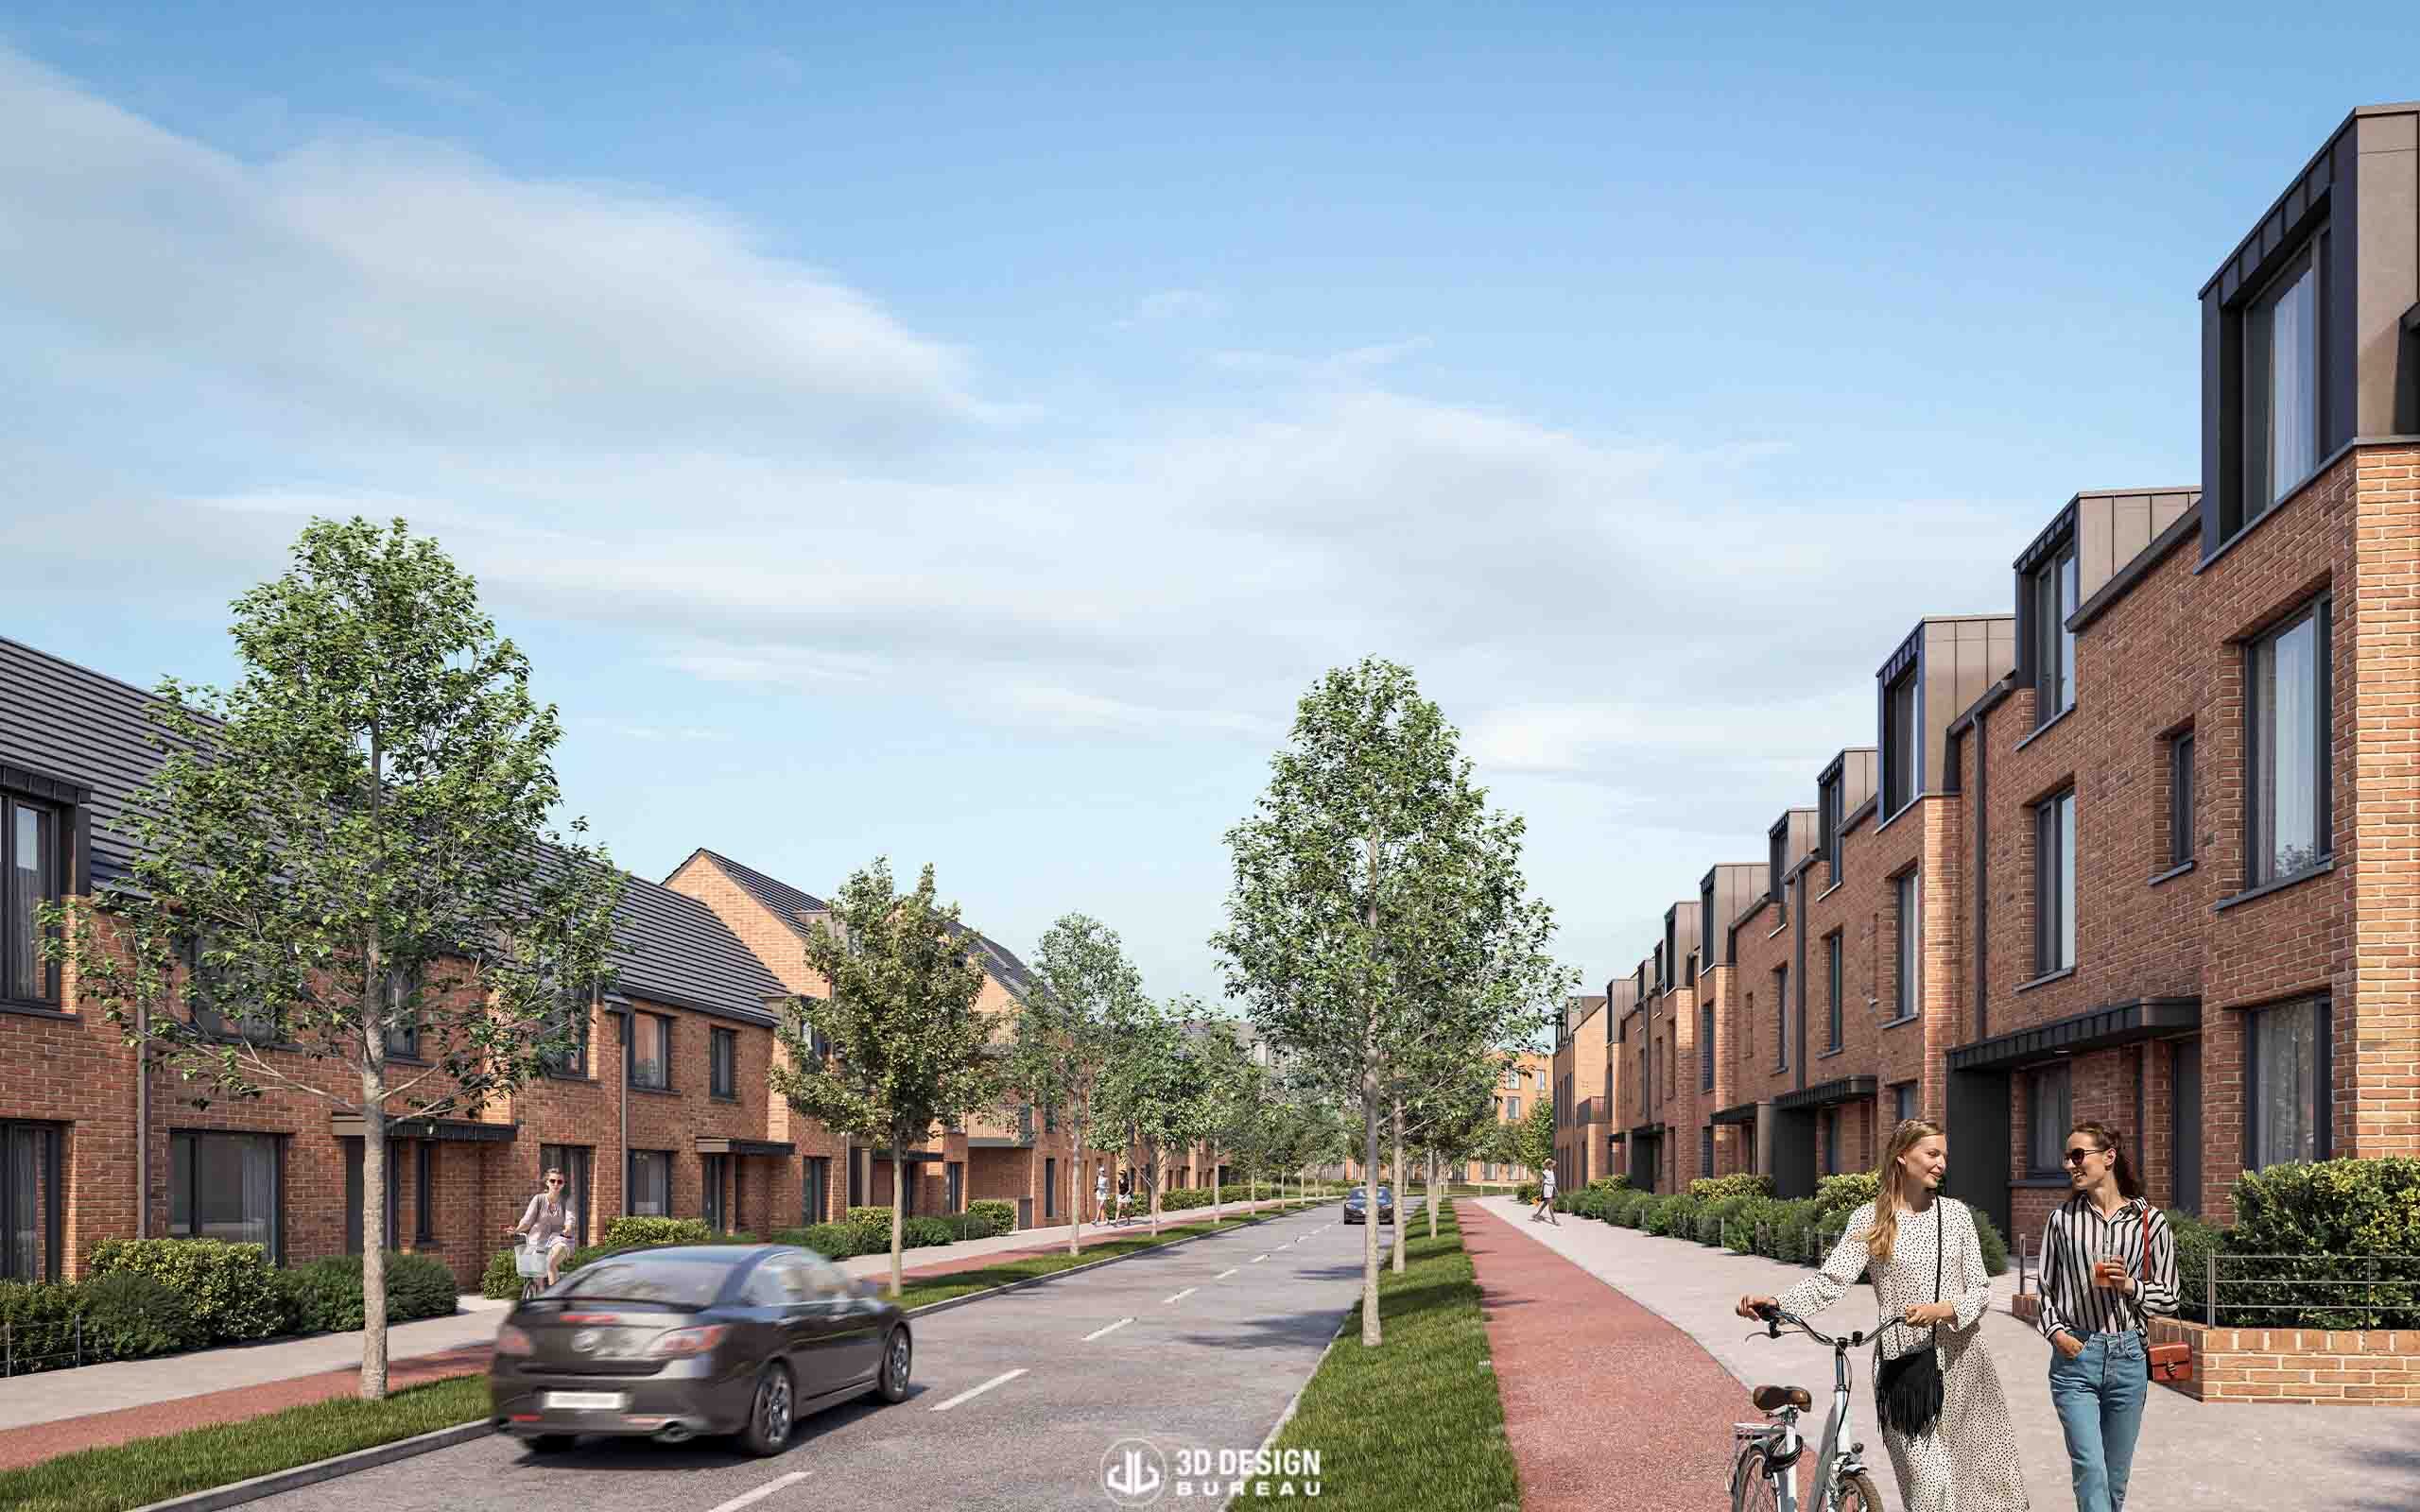 Computer generated imagery of the proposed development in Ashbourne